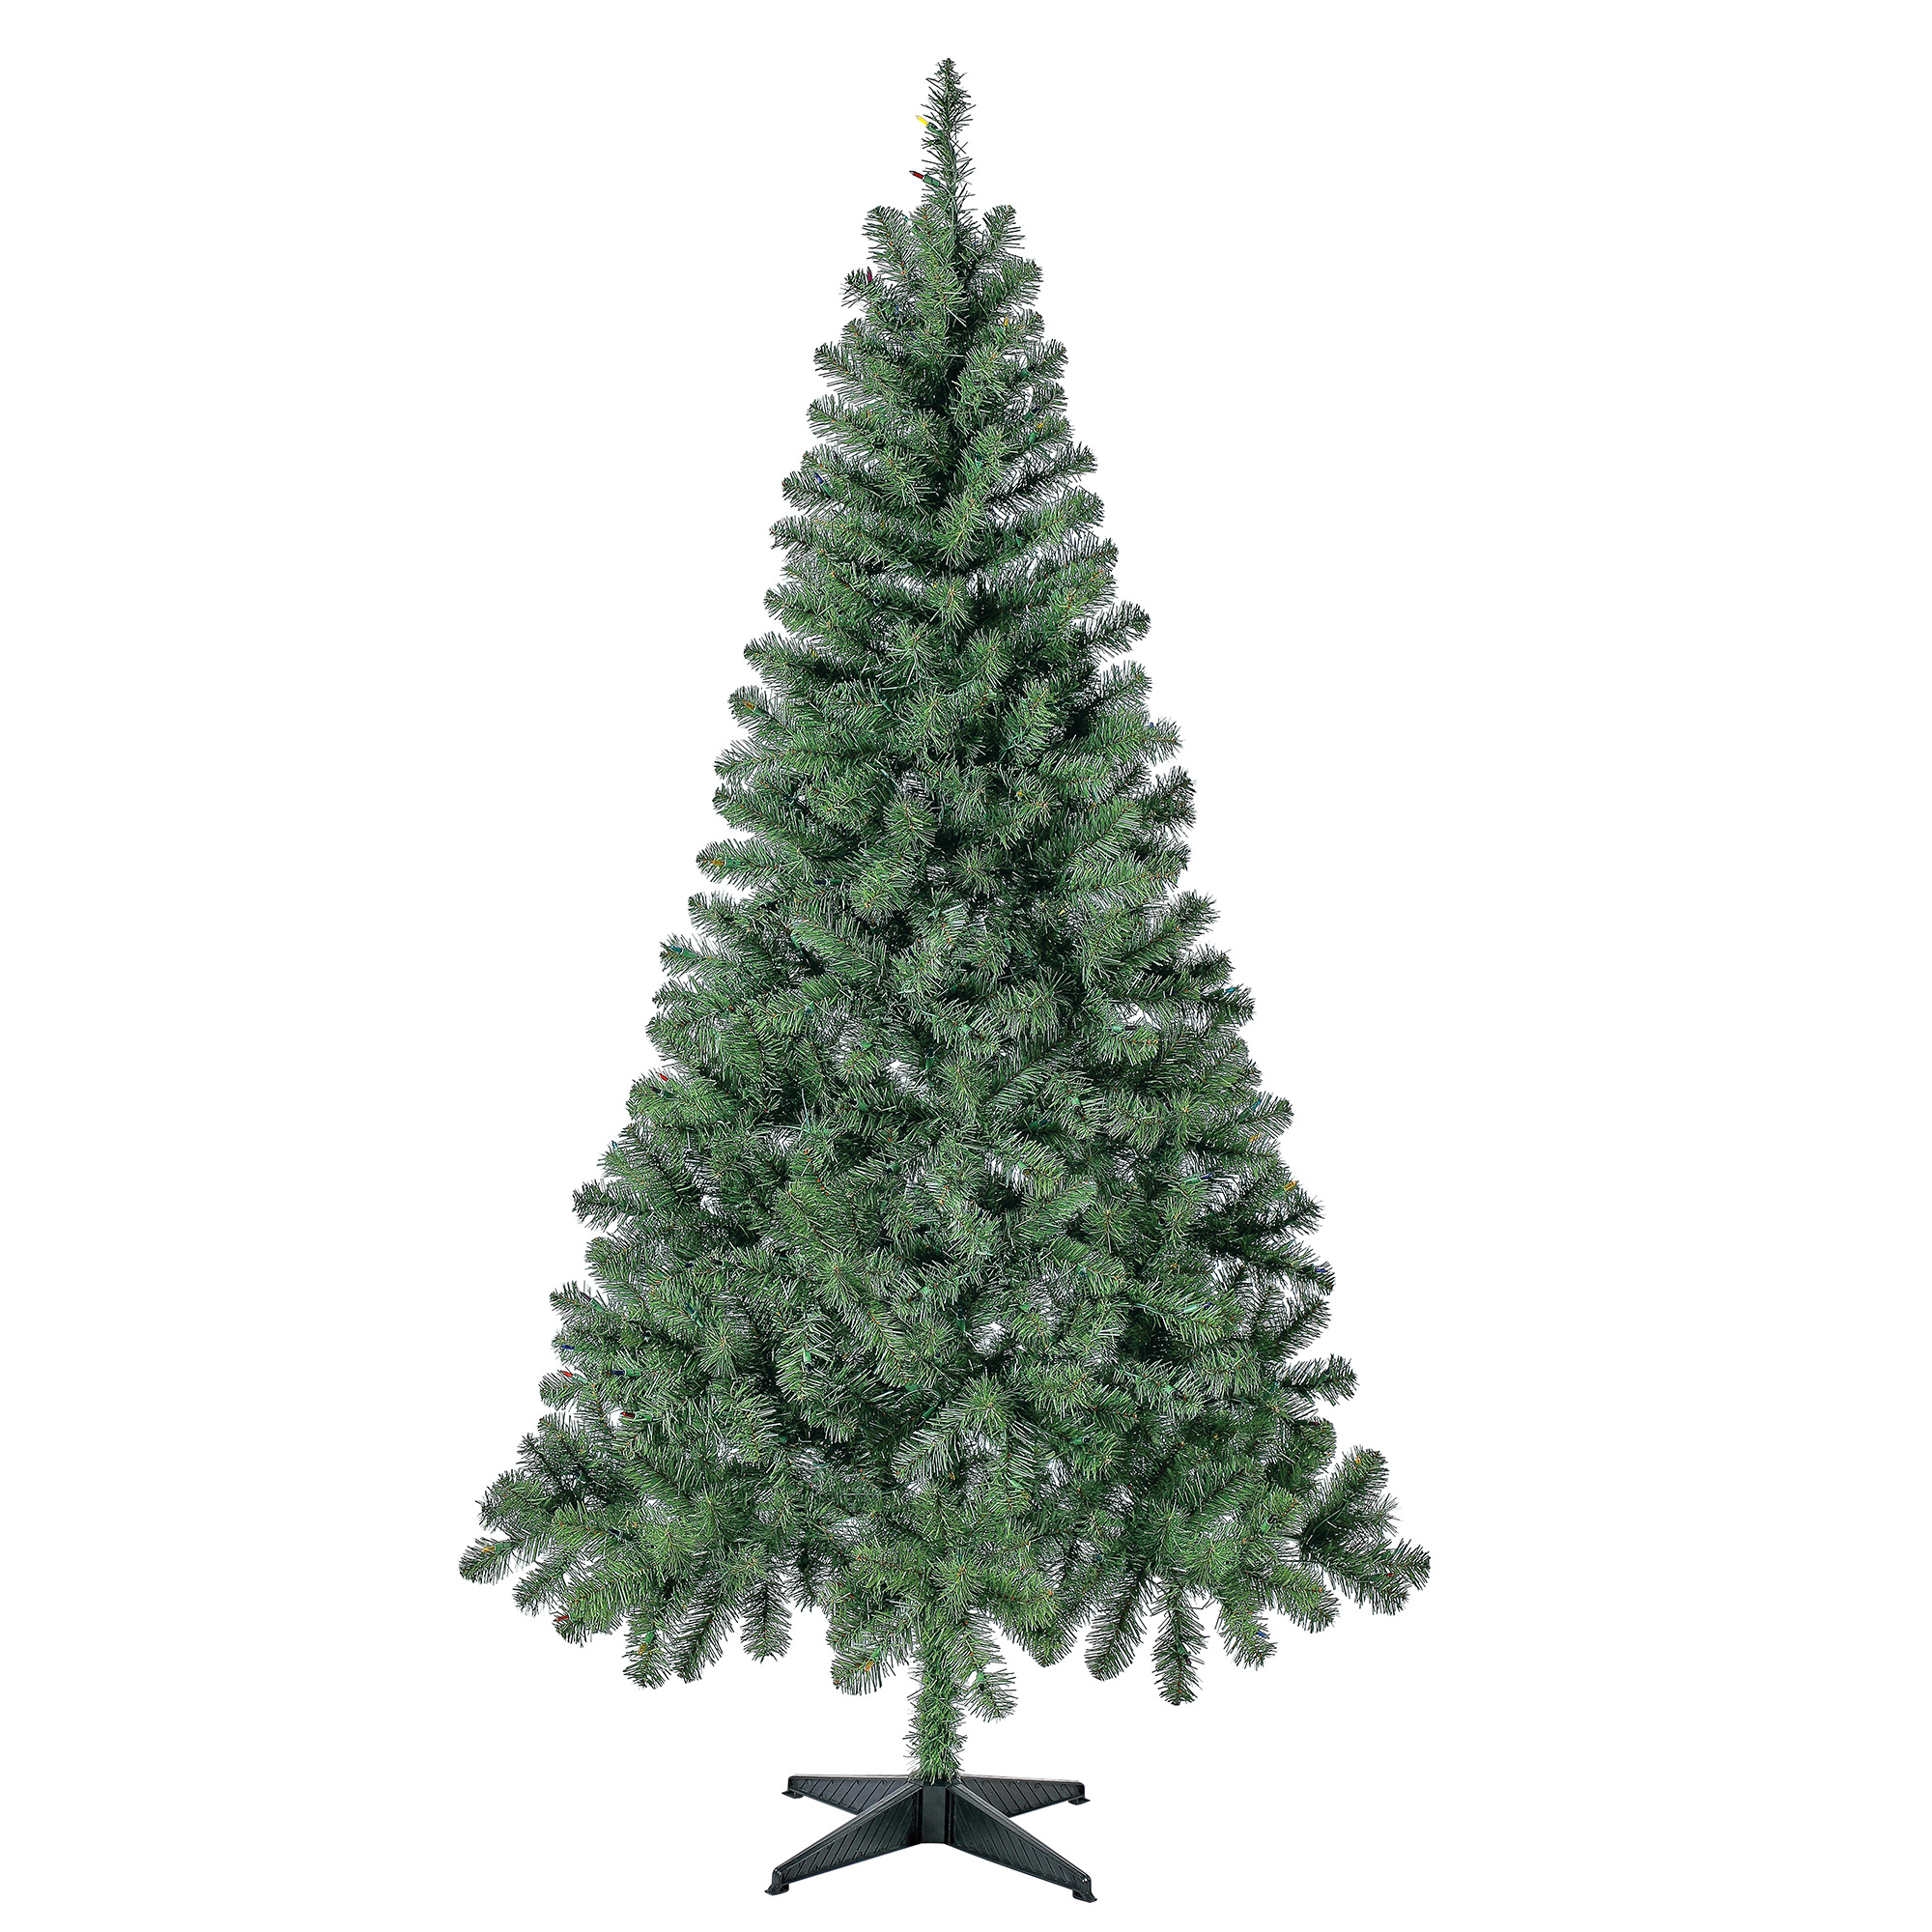 Holiday Time Prelit 300 Multicolor Incandescent Lights, Madison Pine Artificial Christmas Tree, 6.5' - image 4 of 7